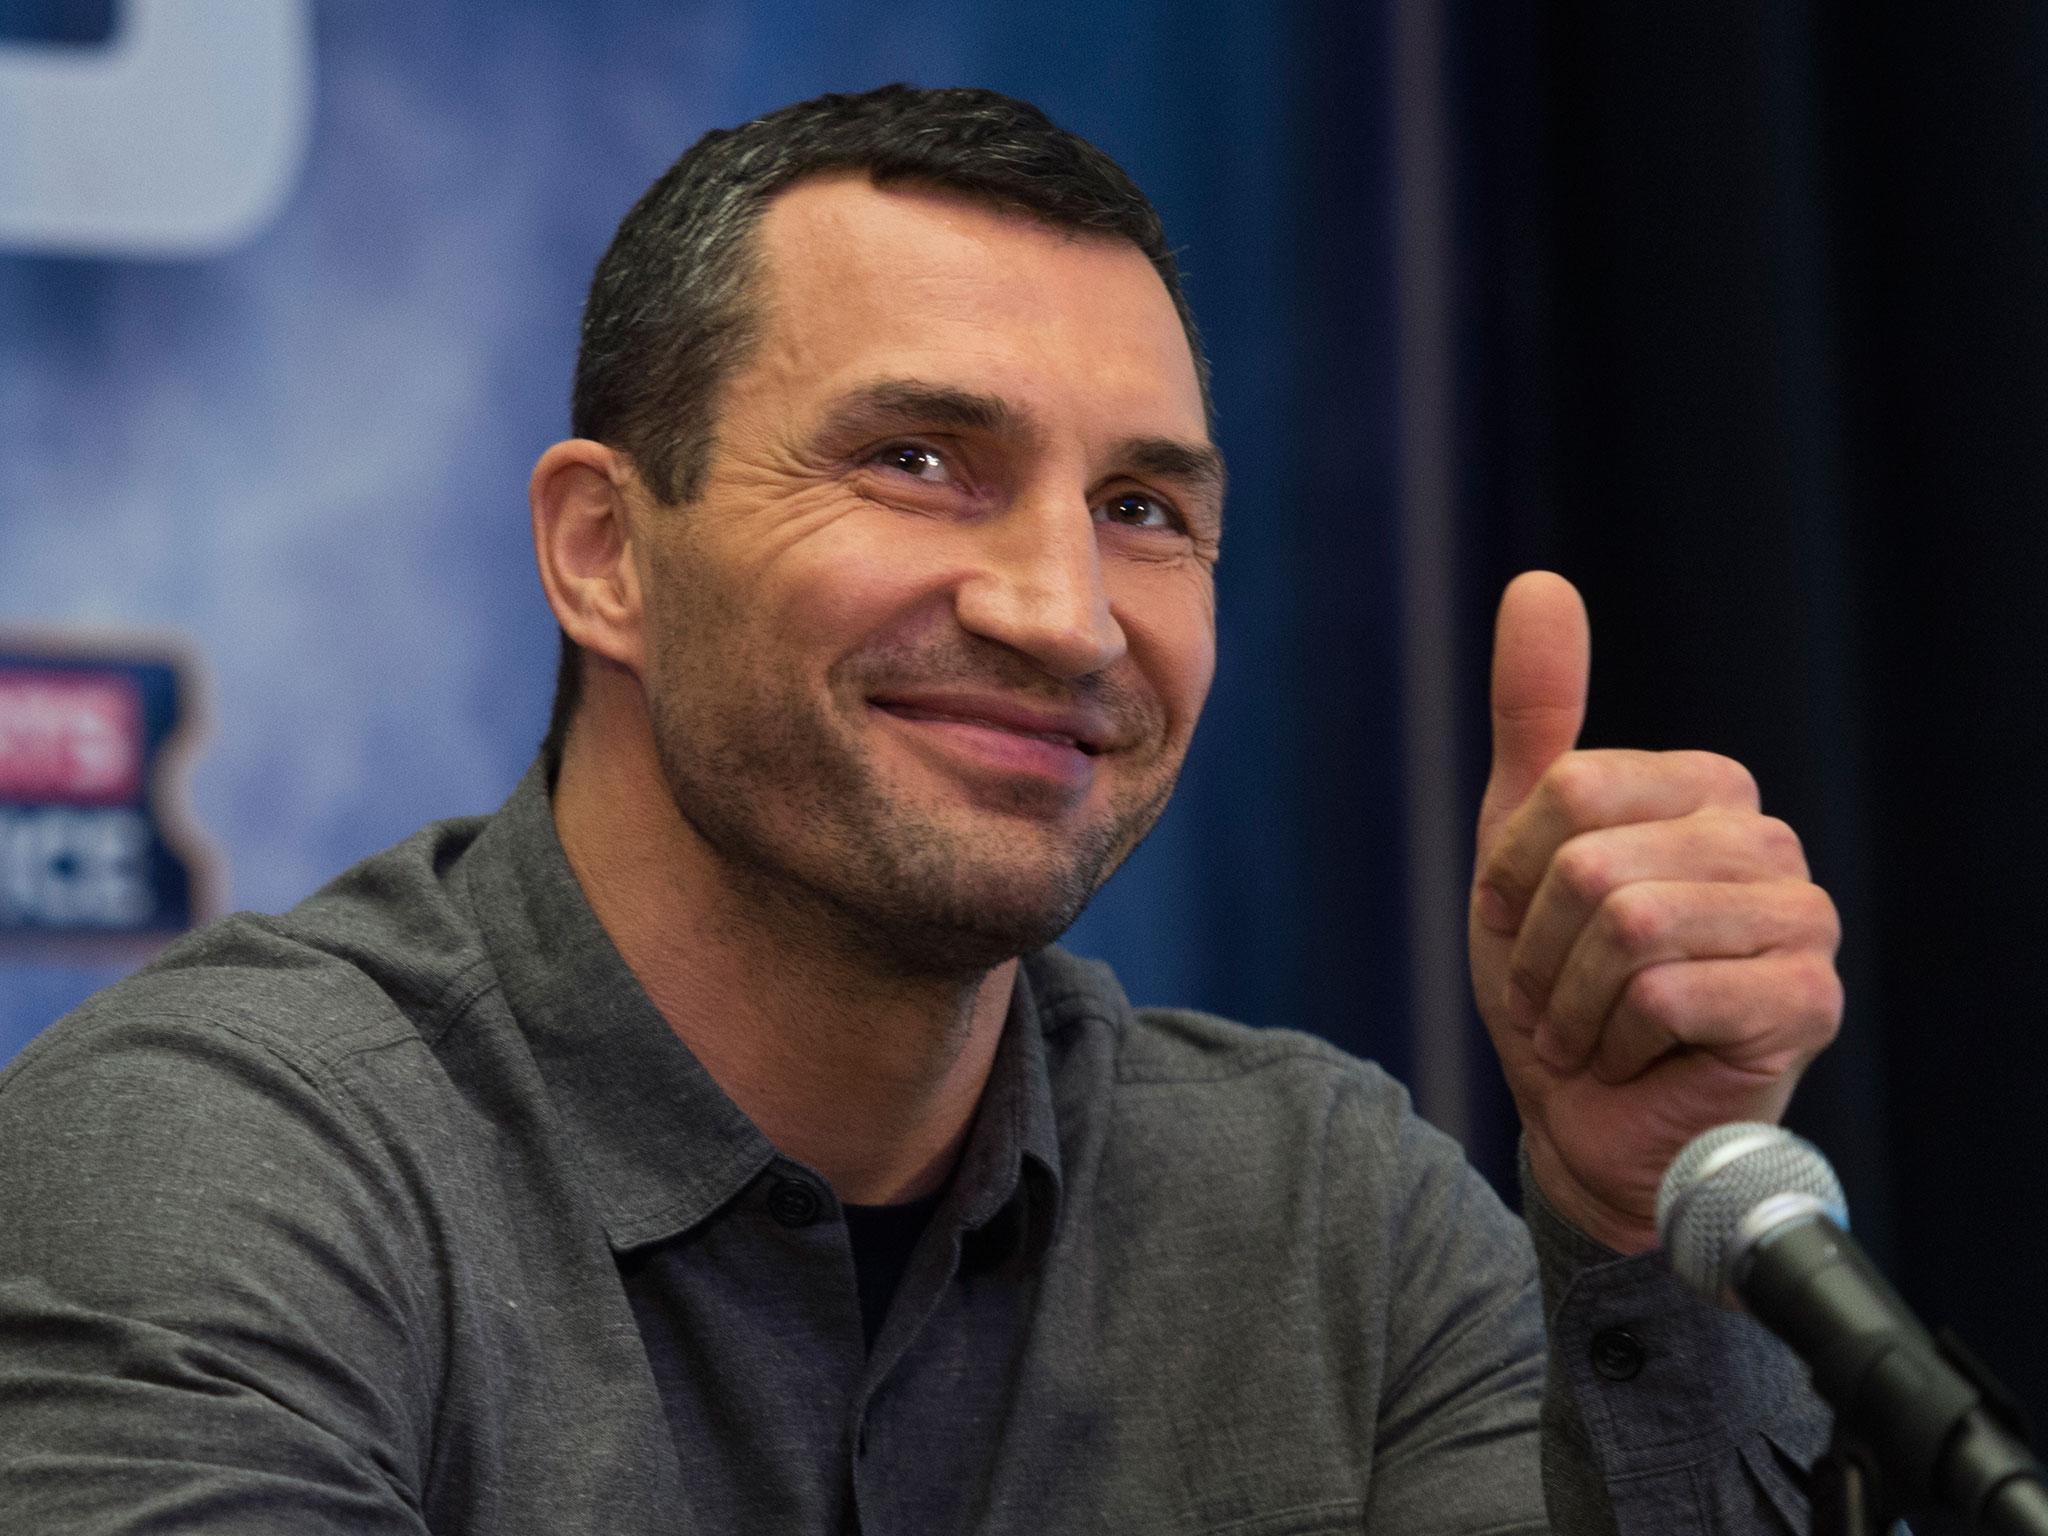 Wladimir Klitschko has finally ramped up the mind games with Anthony Joshua